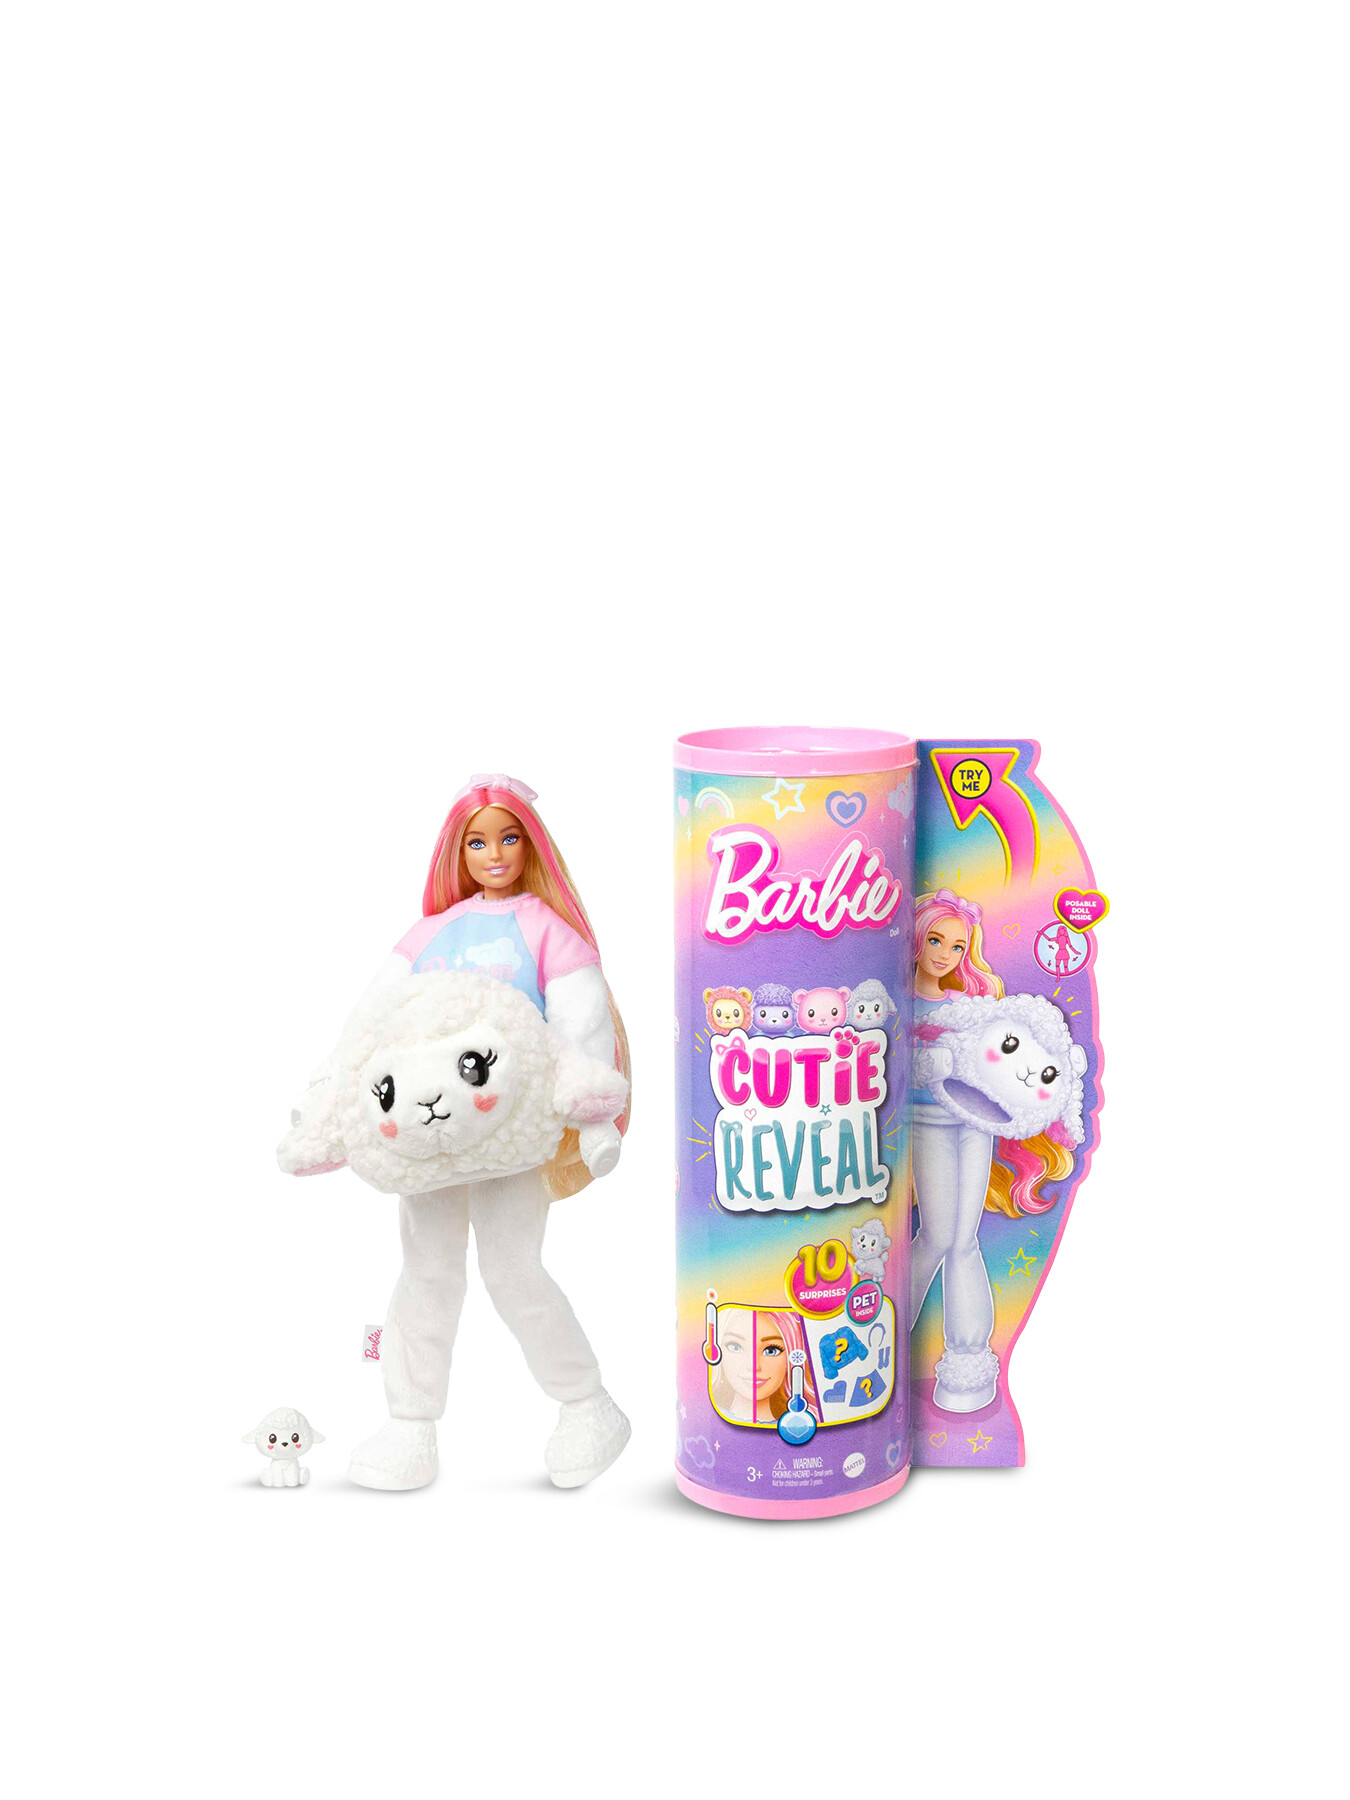 BARBIE CUTIE REVEAL - The Toy Insider